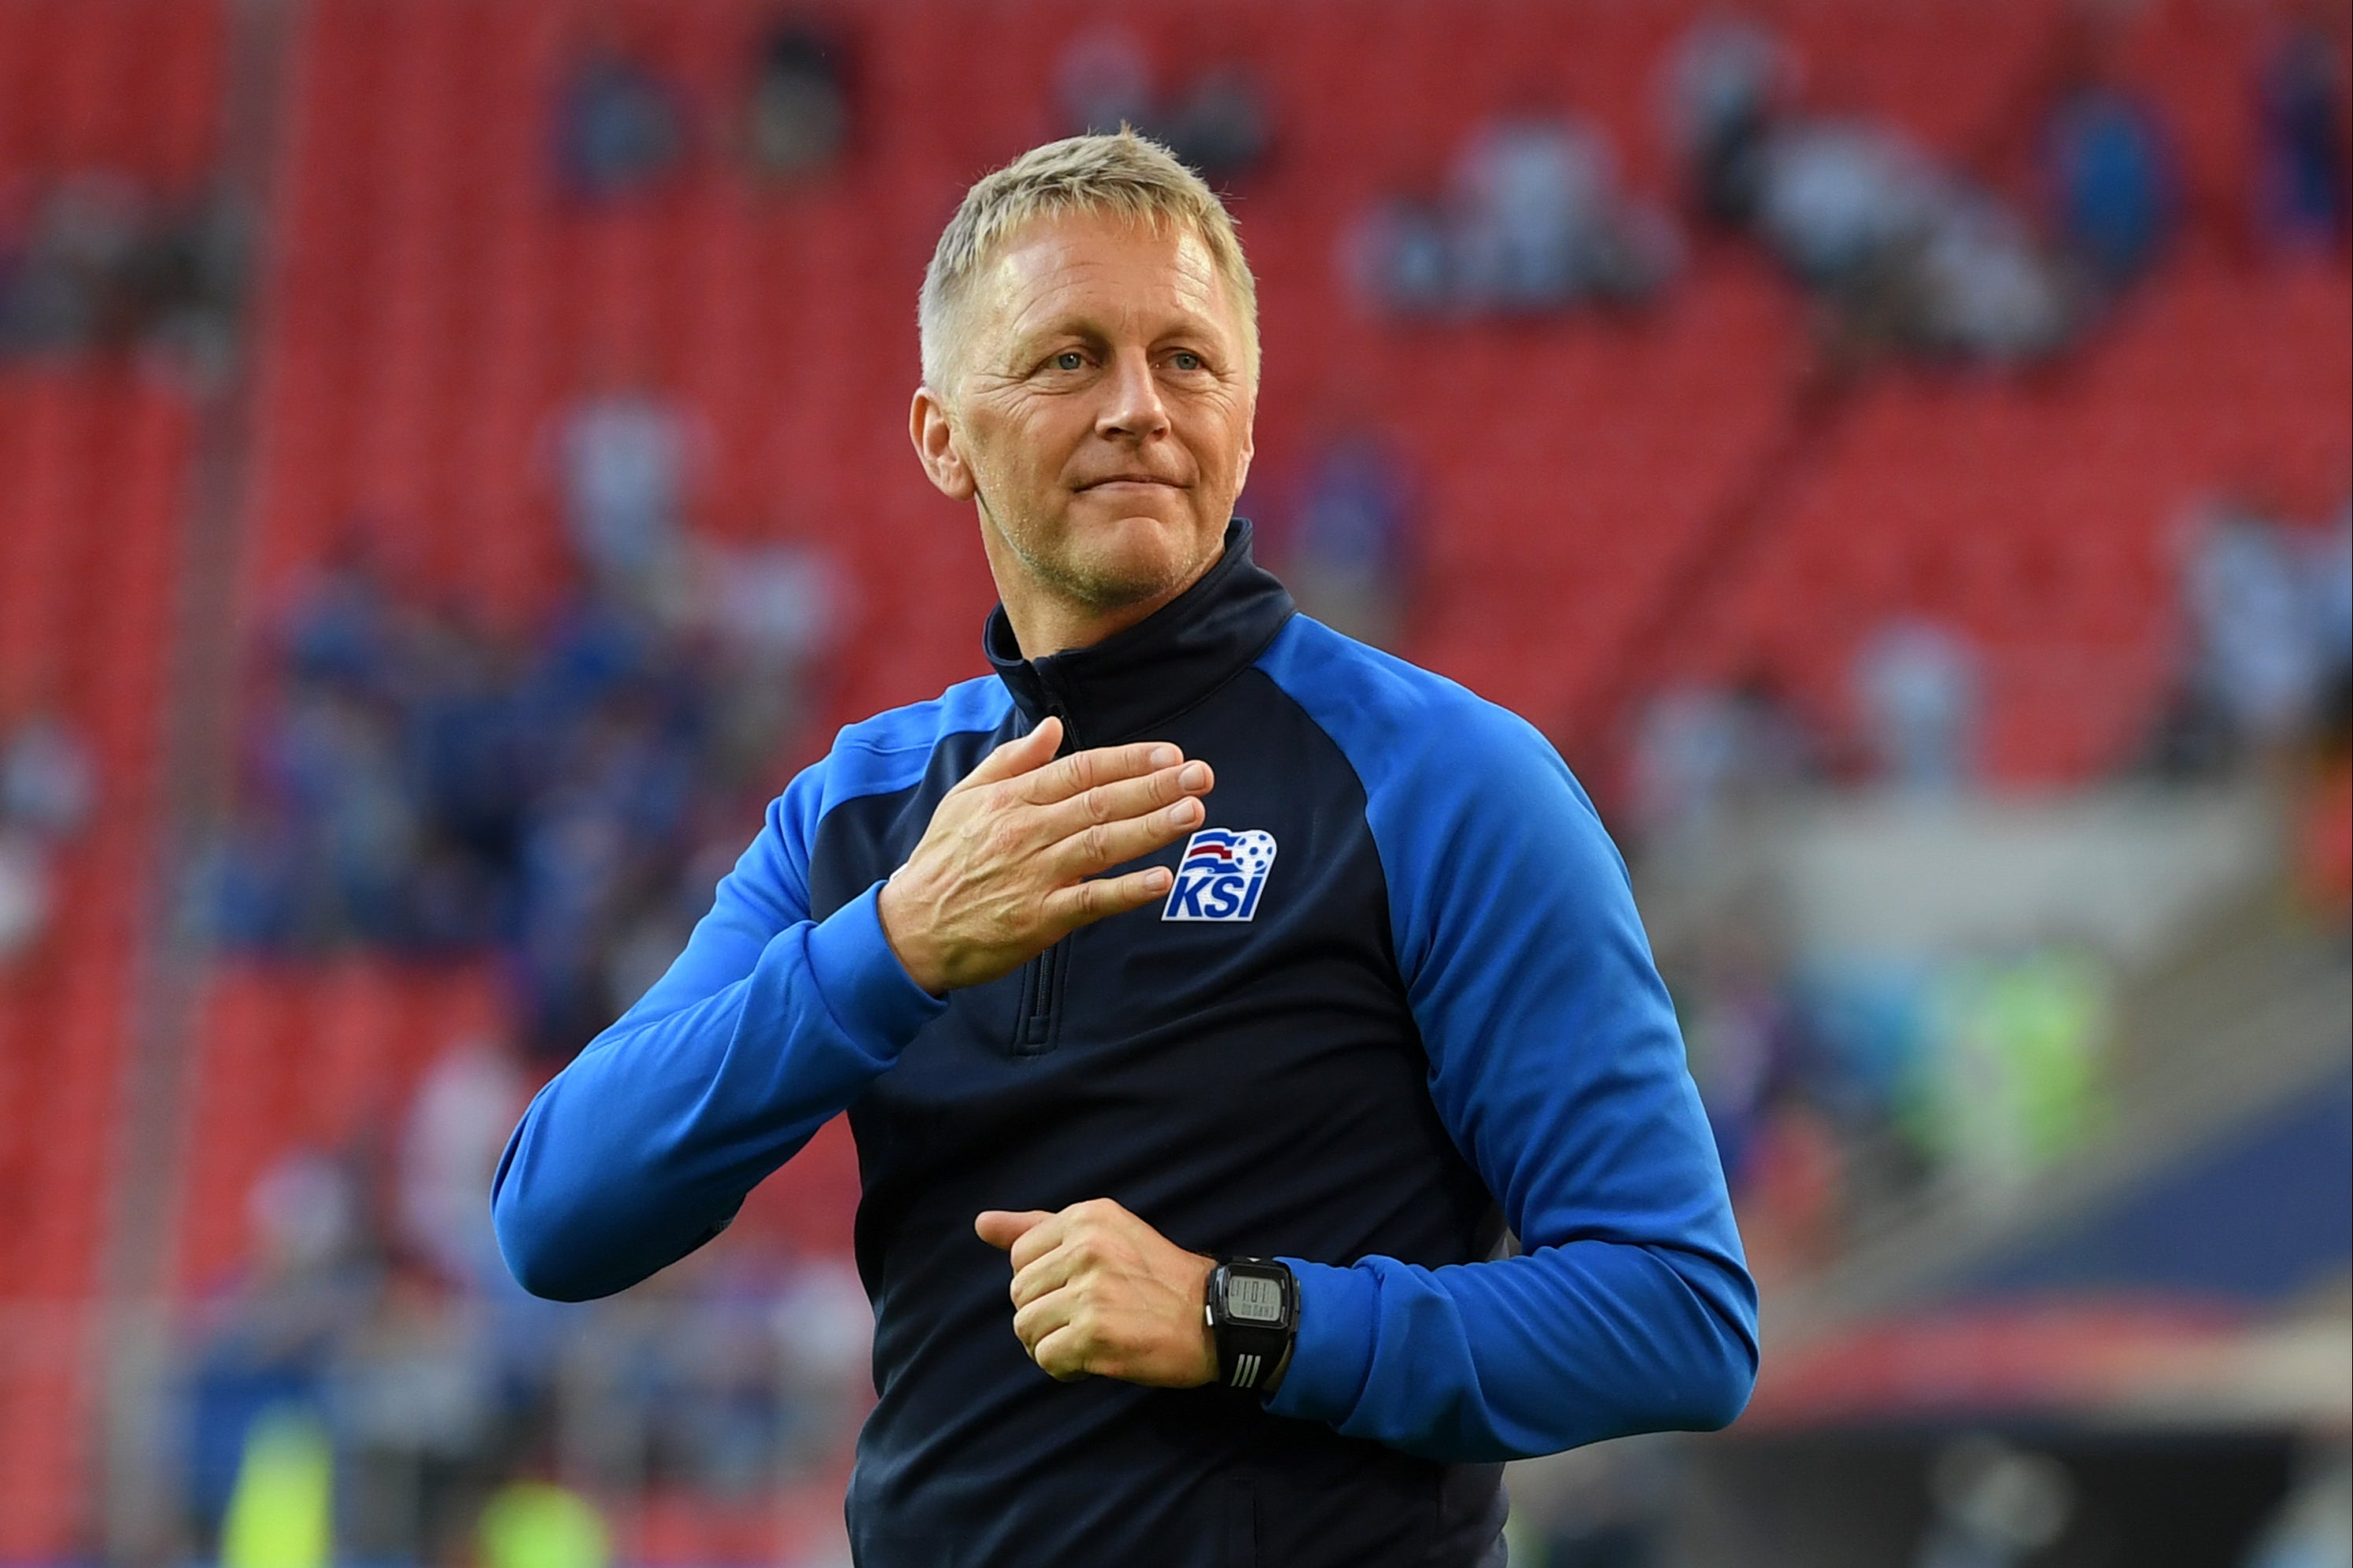 Heimir Hallgrimsson has been appointed manager of the Republic of Ireland